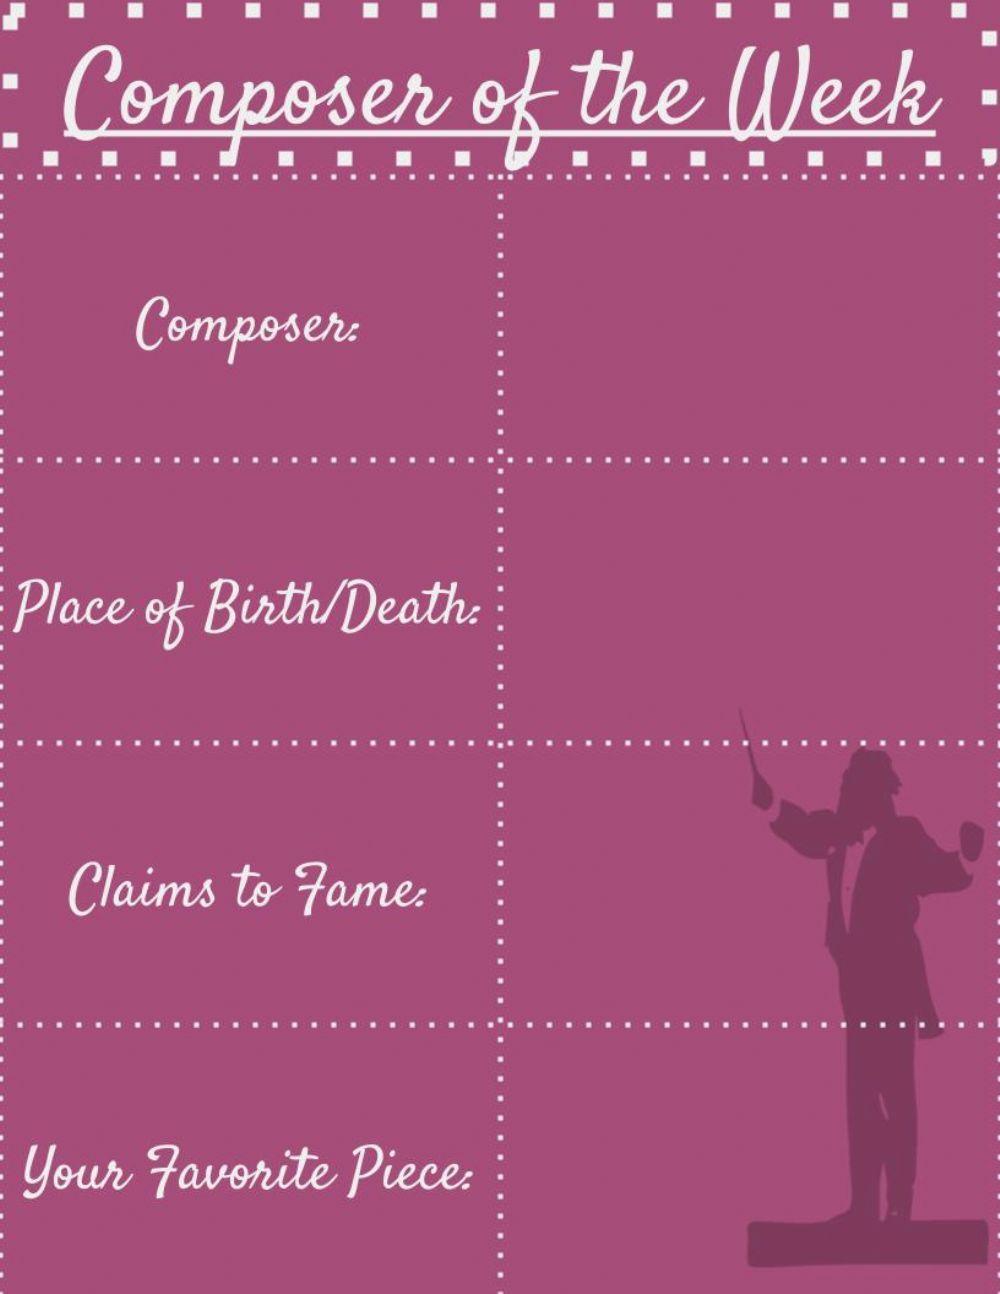 Composer of the Week